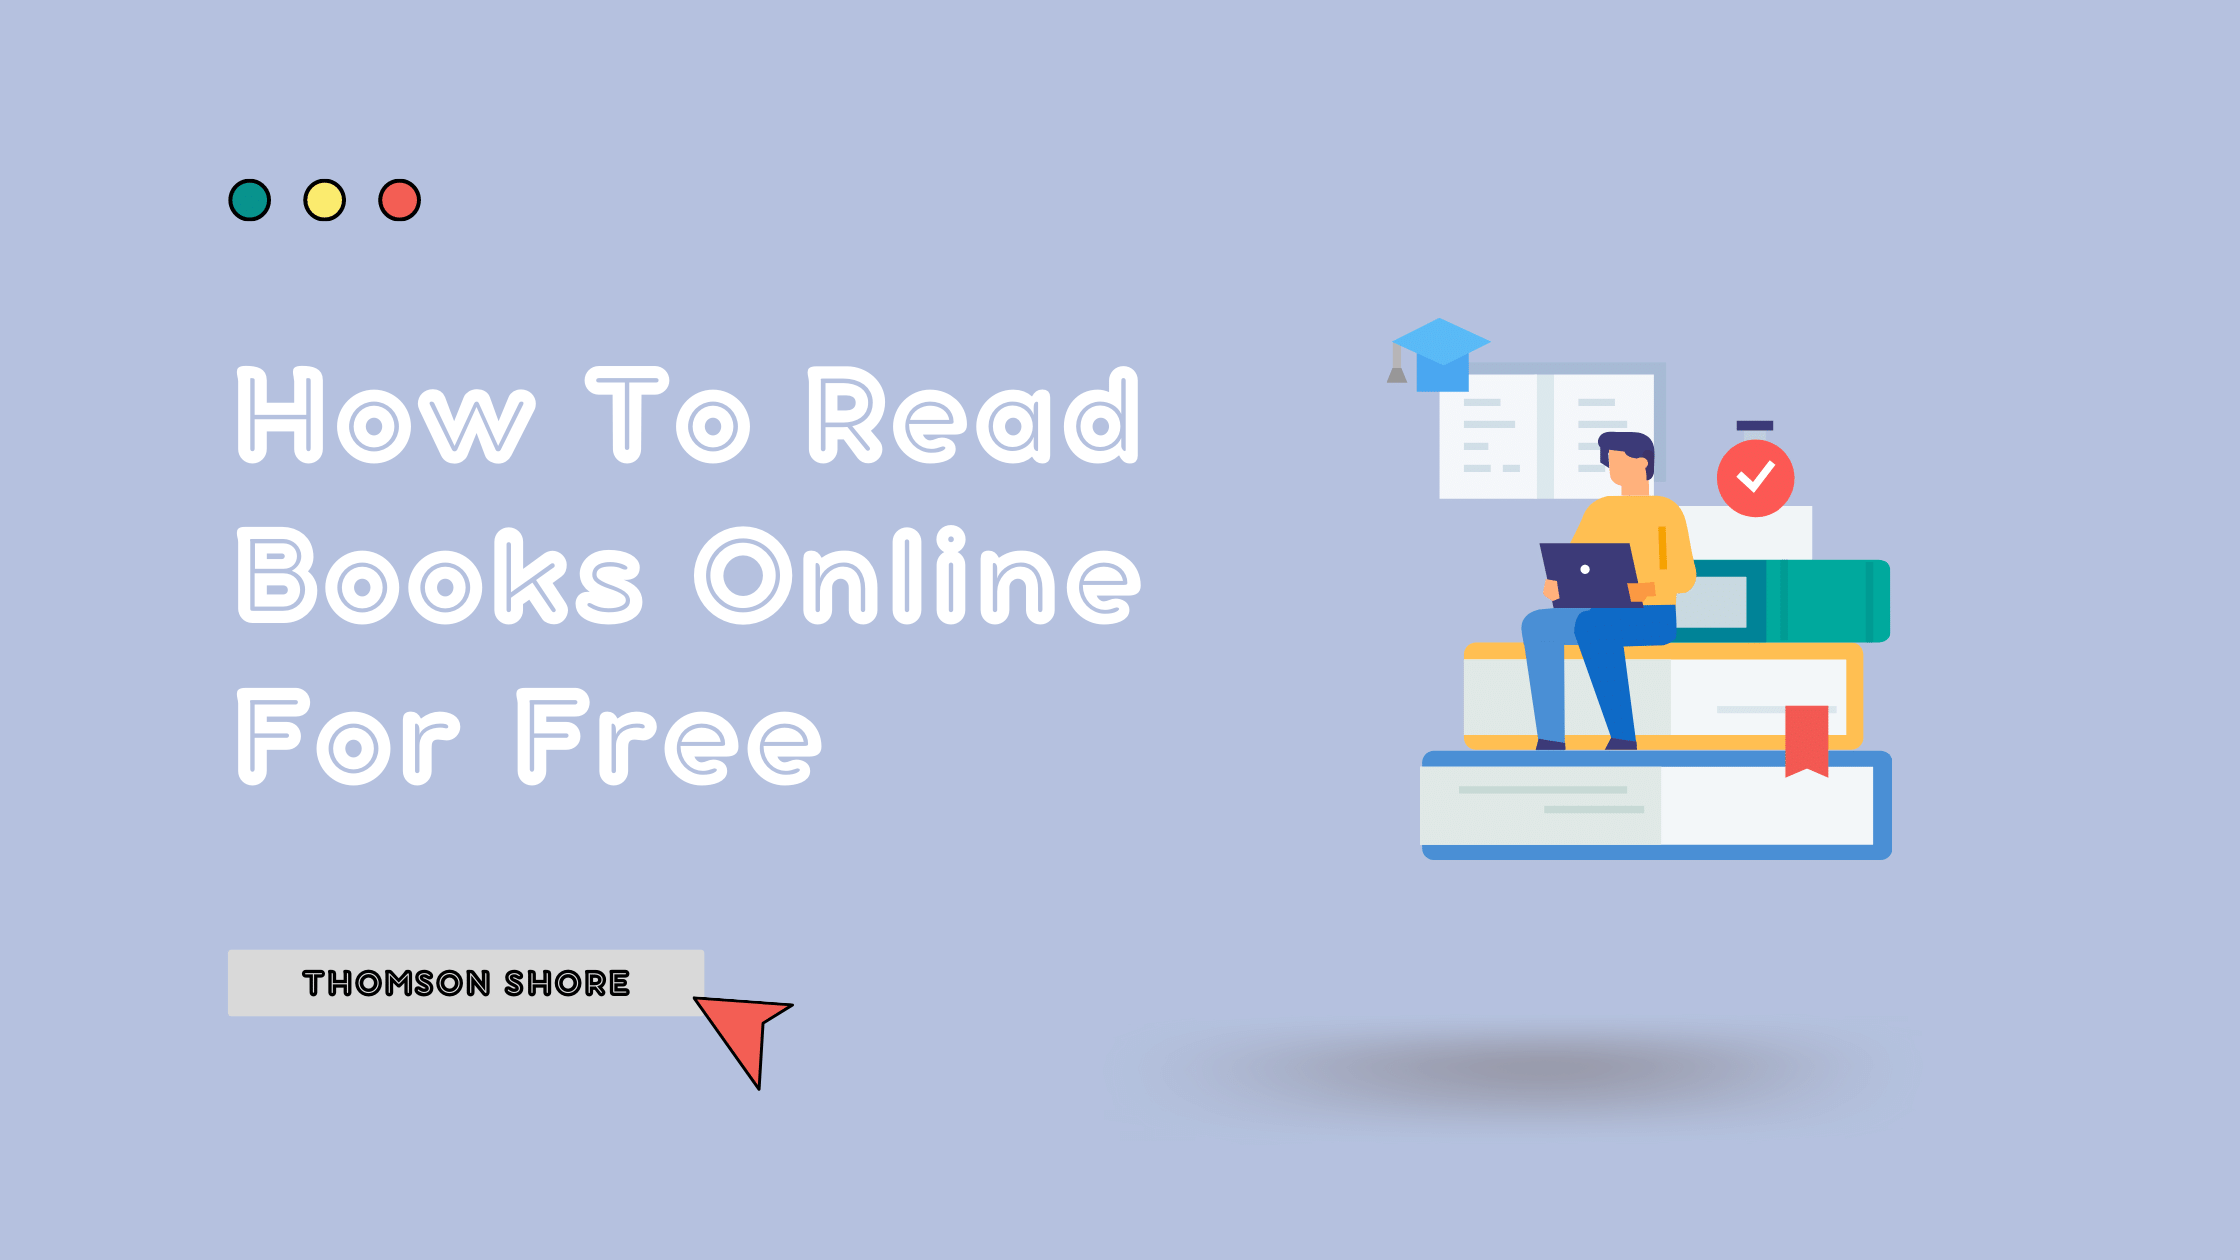 Where to Read Books Online for Free